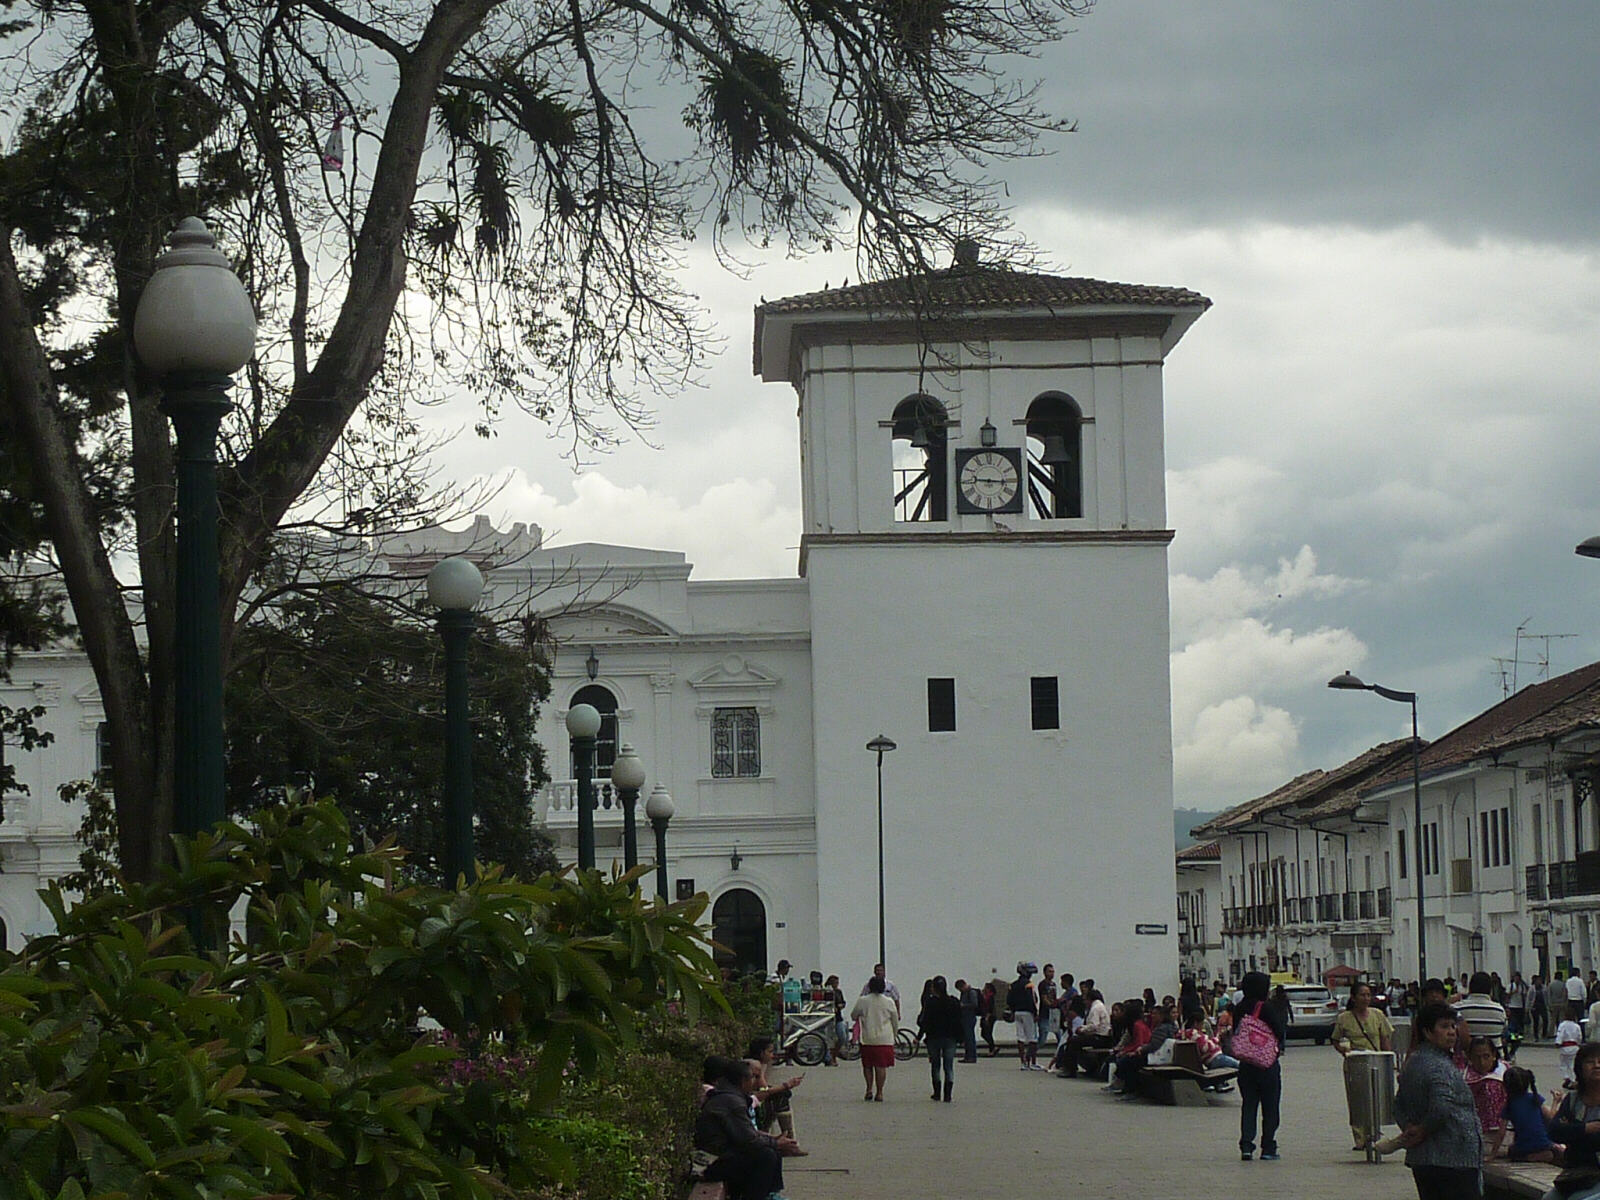 Bell tower in the main square, Popayan, Colombia